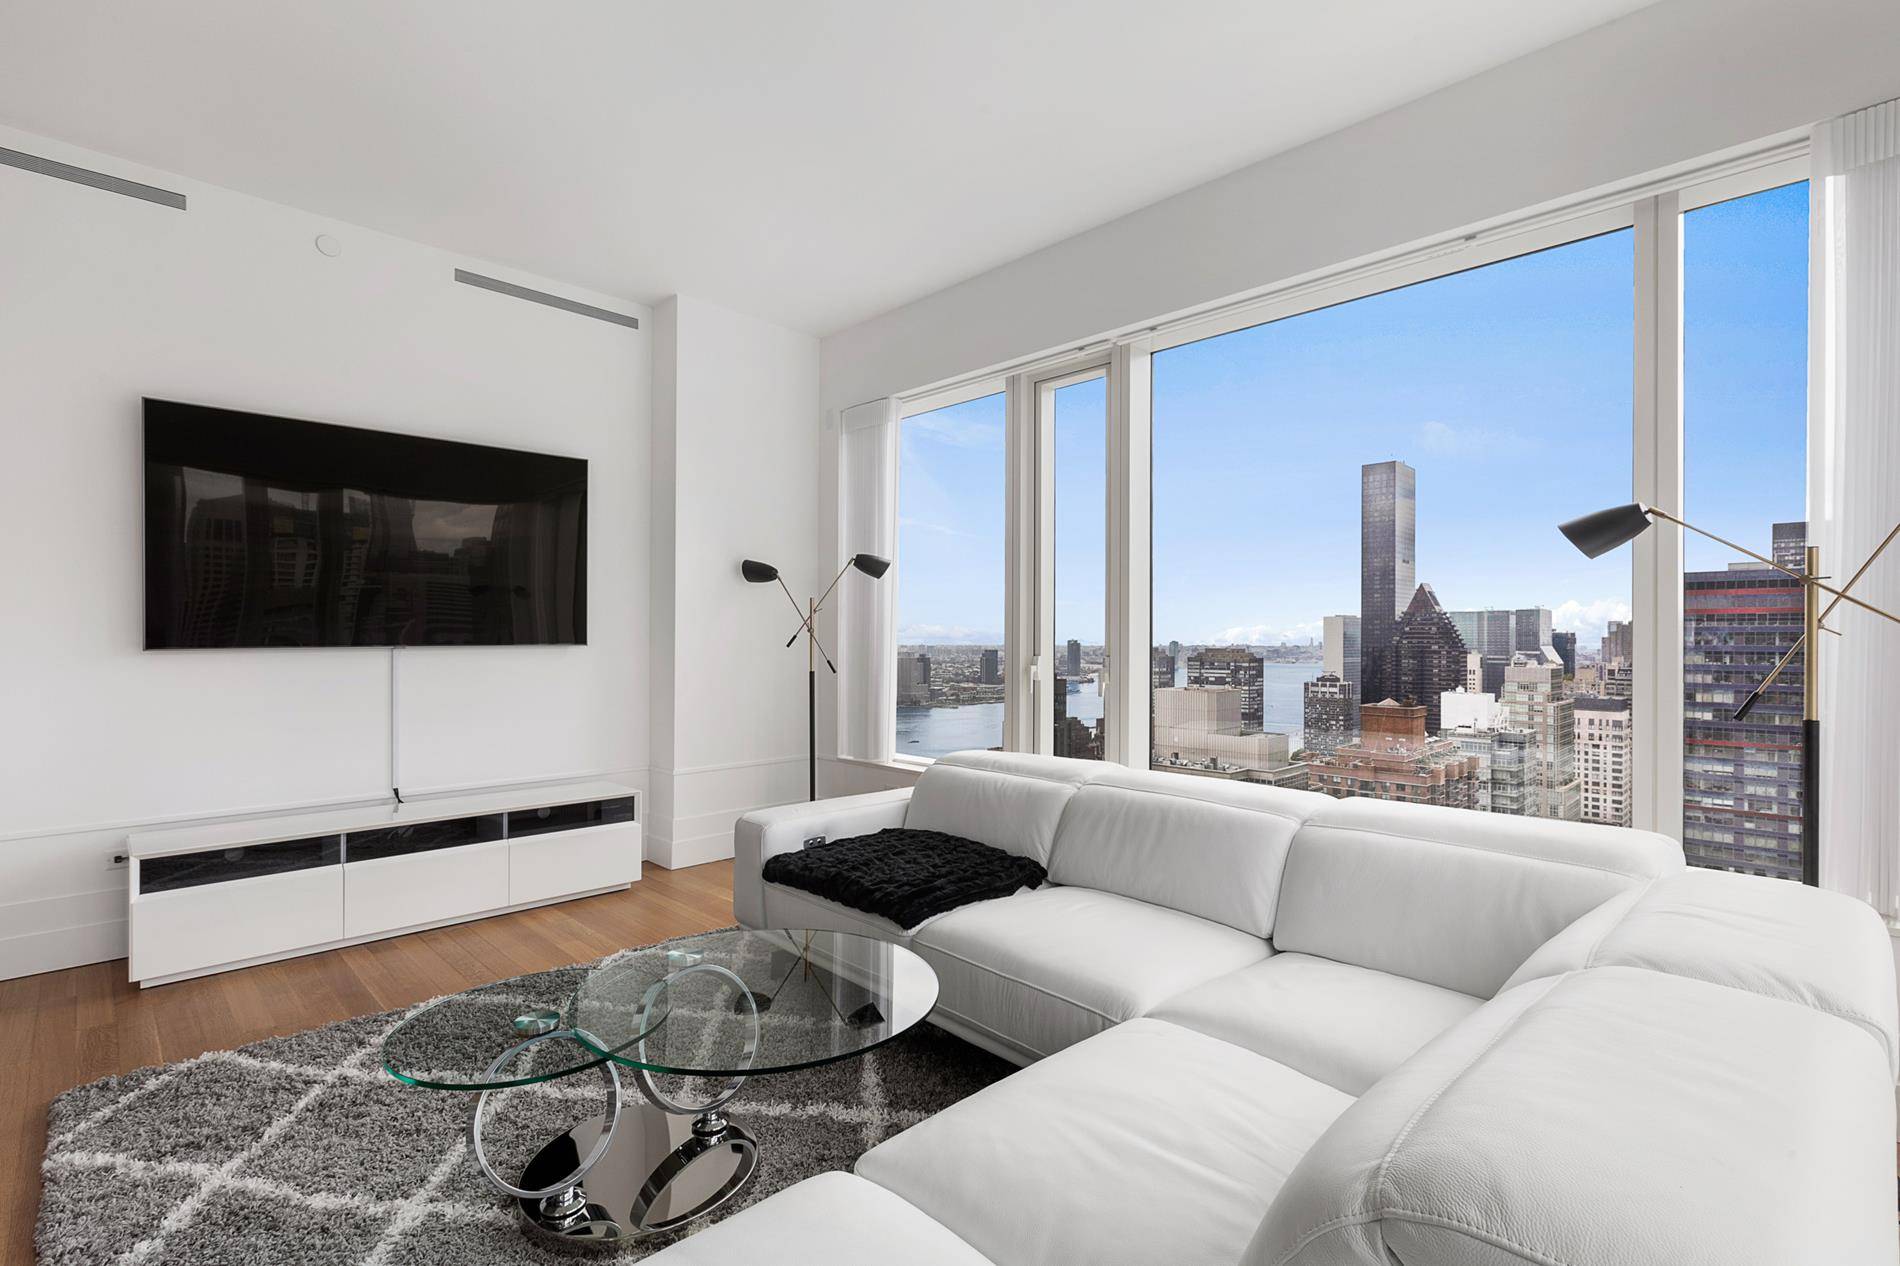 THIS APARTMENT OFFERS ON SITE AUTOMATED PARKING SPACE Spacious 1, 736 square foot corner residence with panoramic views of south and west skyline through oversized windows.